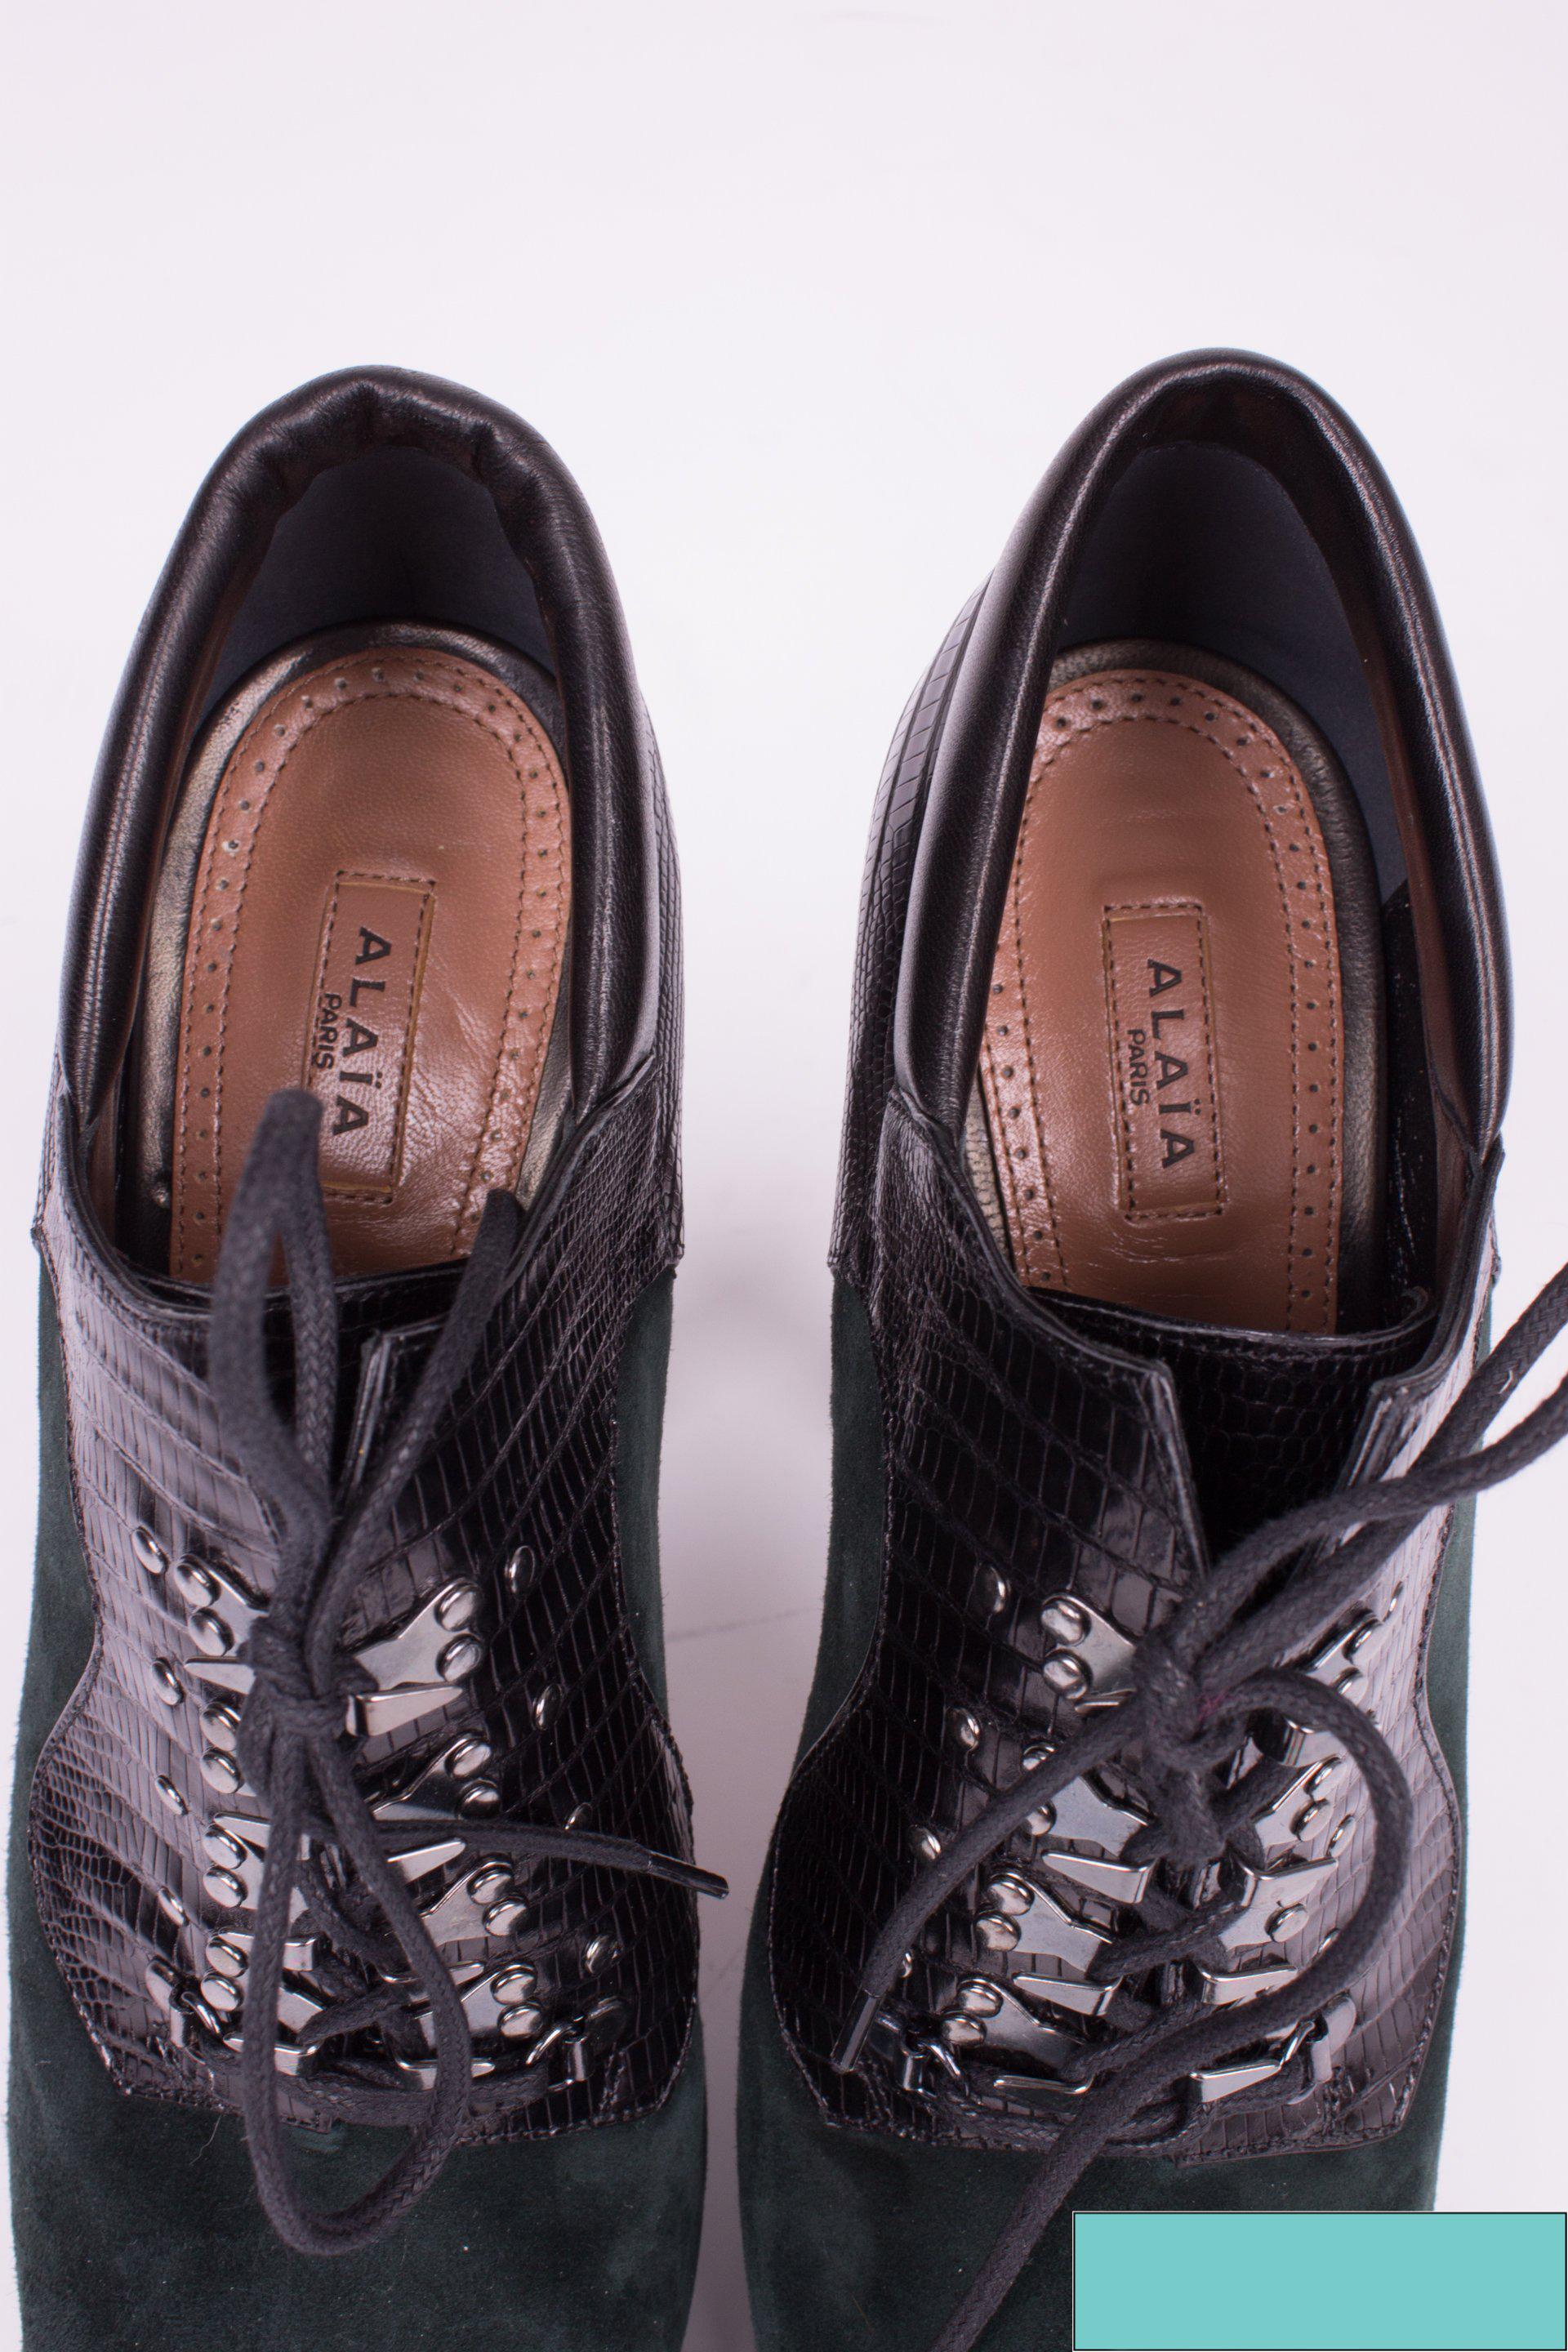 ALAIA High Heeled Lace-up Shoes - green/black  In New Condition For Sale In Baarn, NL